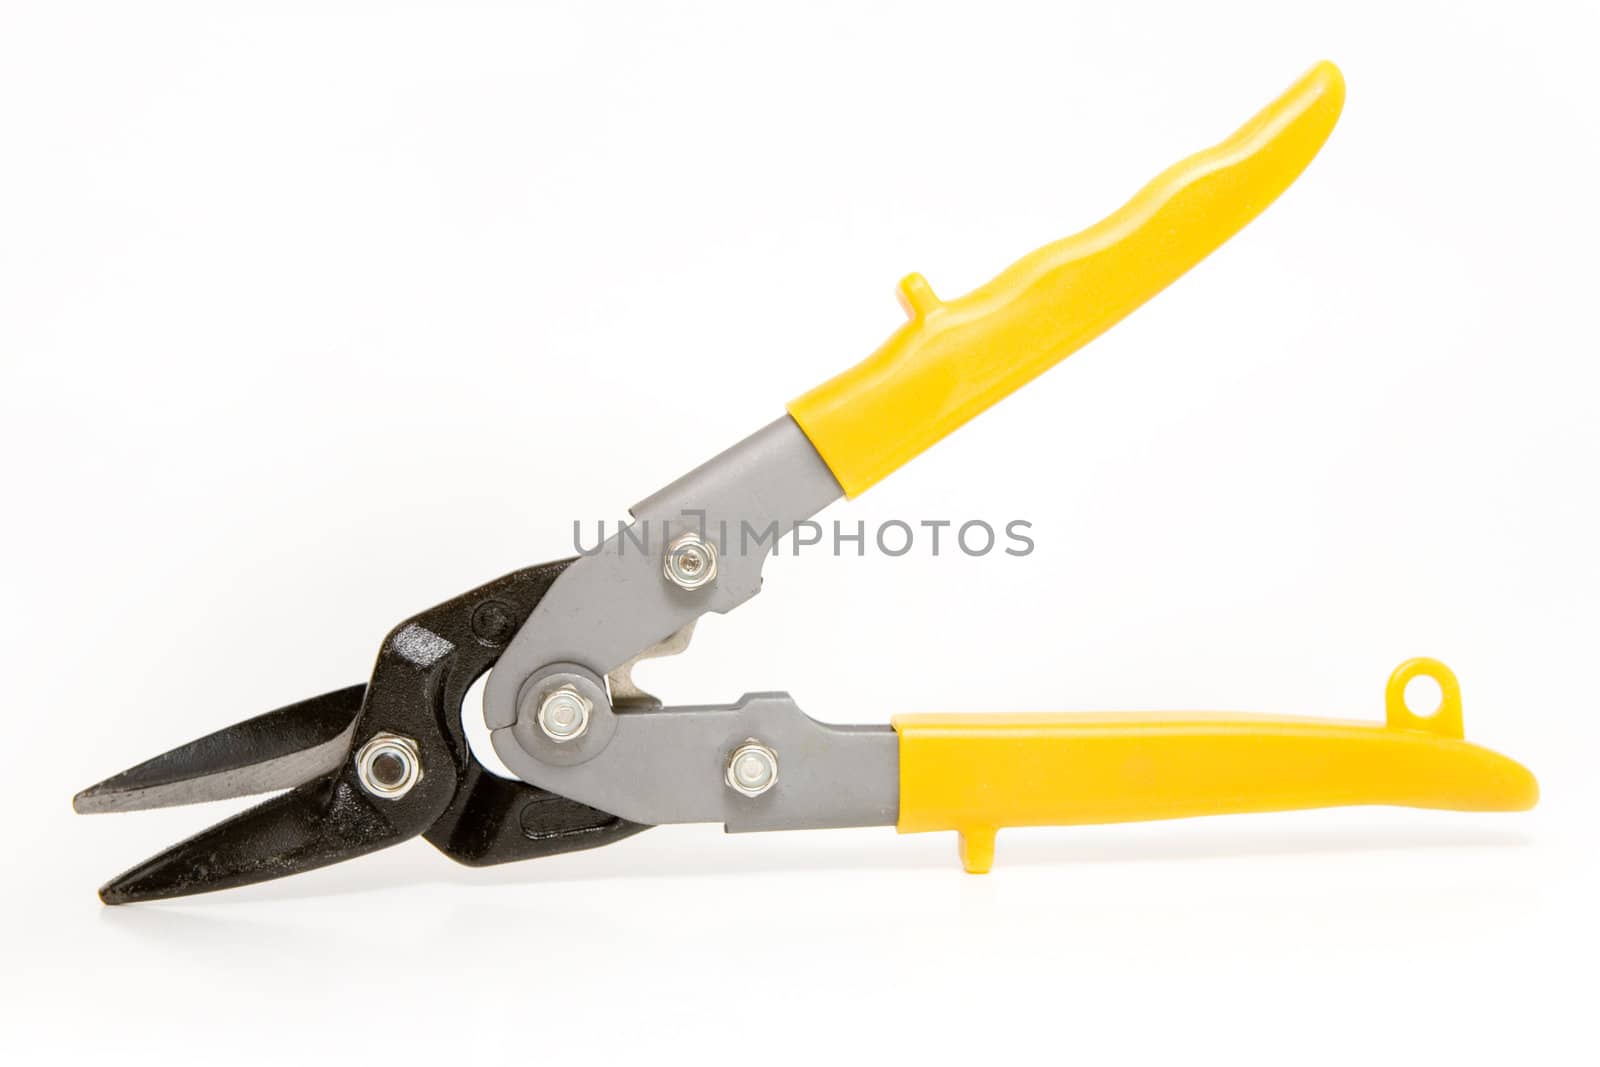 Sheet metal cutters on a white background